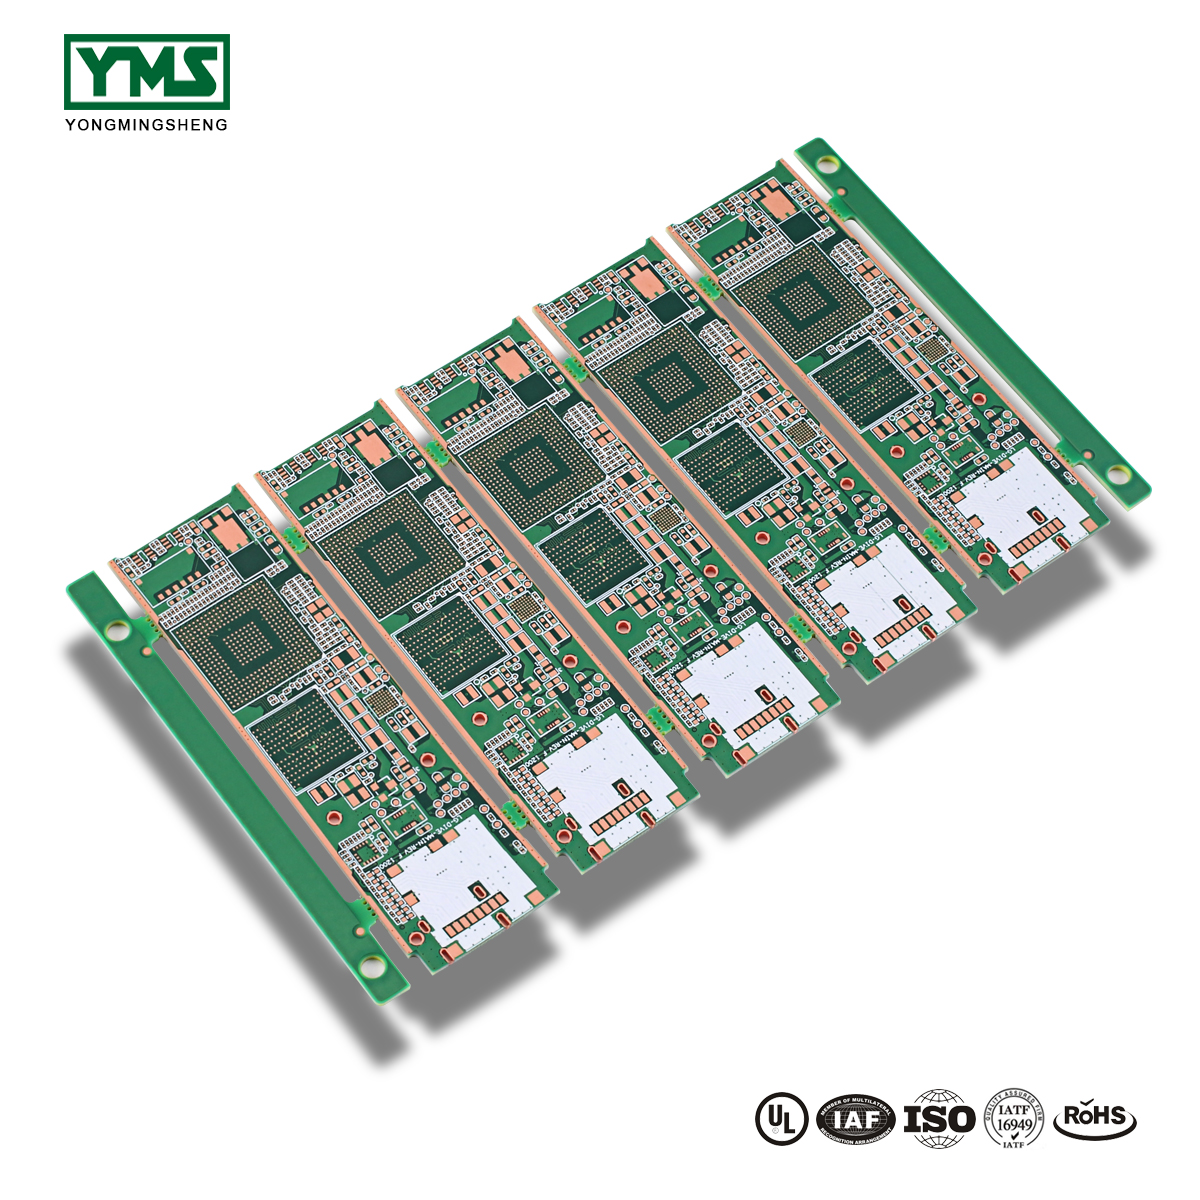 OEM/ODM Supplier Huge Size Pcb,Big Size Pcb - 12Layer Immersion Gold HDI | YMS PCB – Yongmingsheng